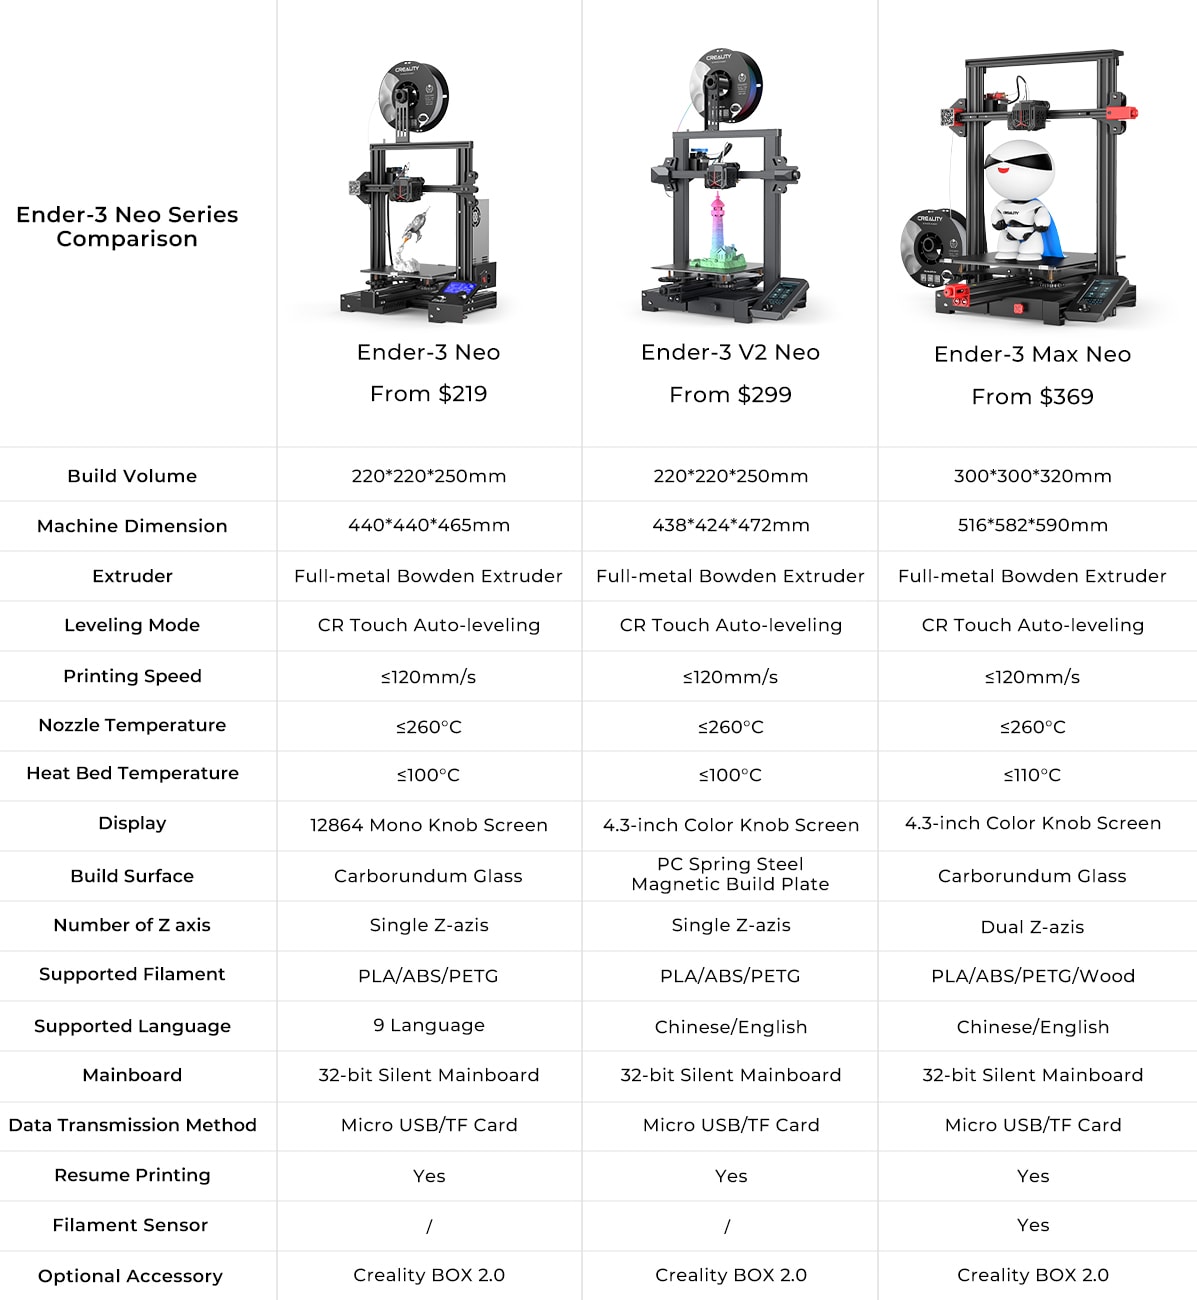 A comparison of the Ender-3 Neo, V2 Neo, and Max Neo